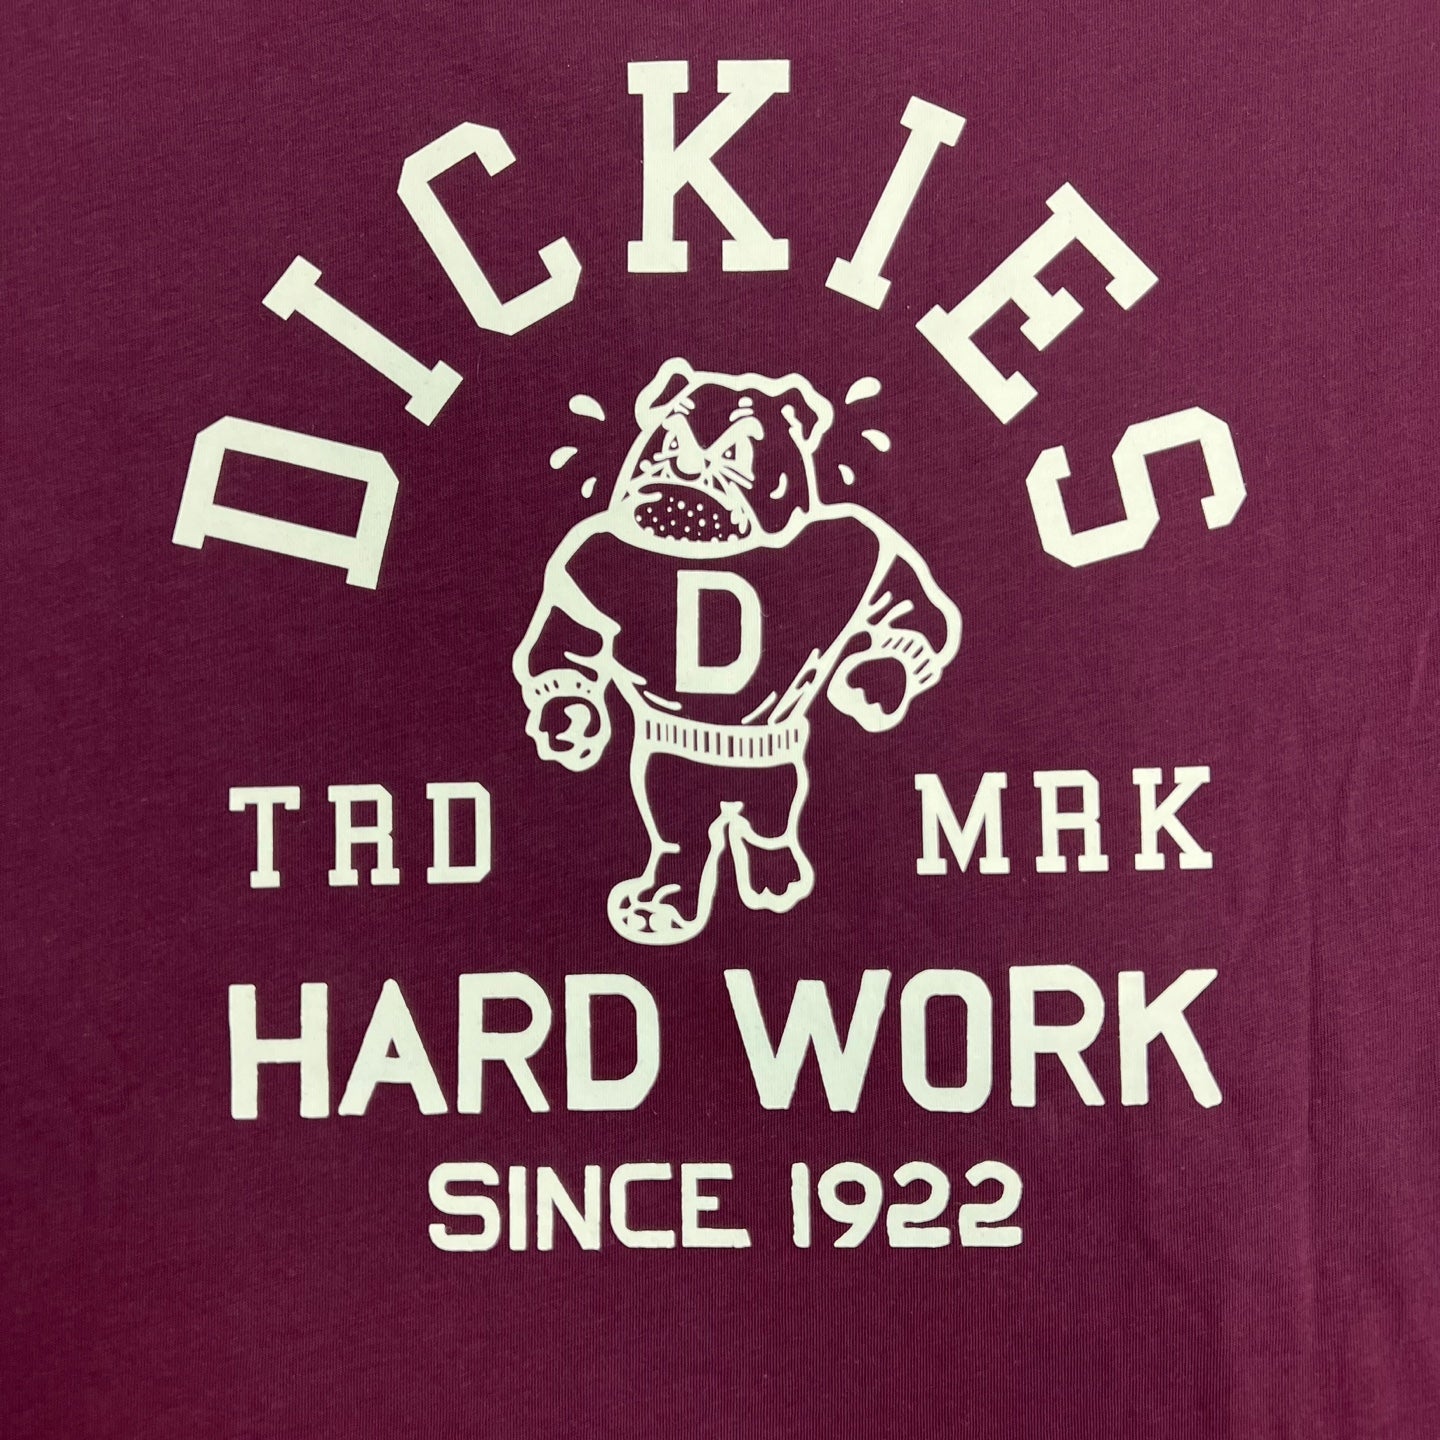 Dickies Cleveland Short Sleeve Graphic T-Shirt